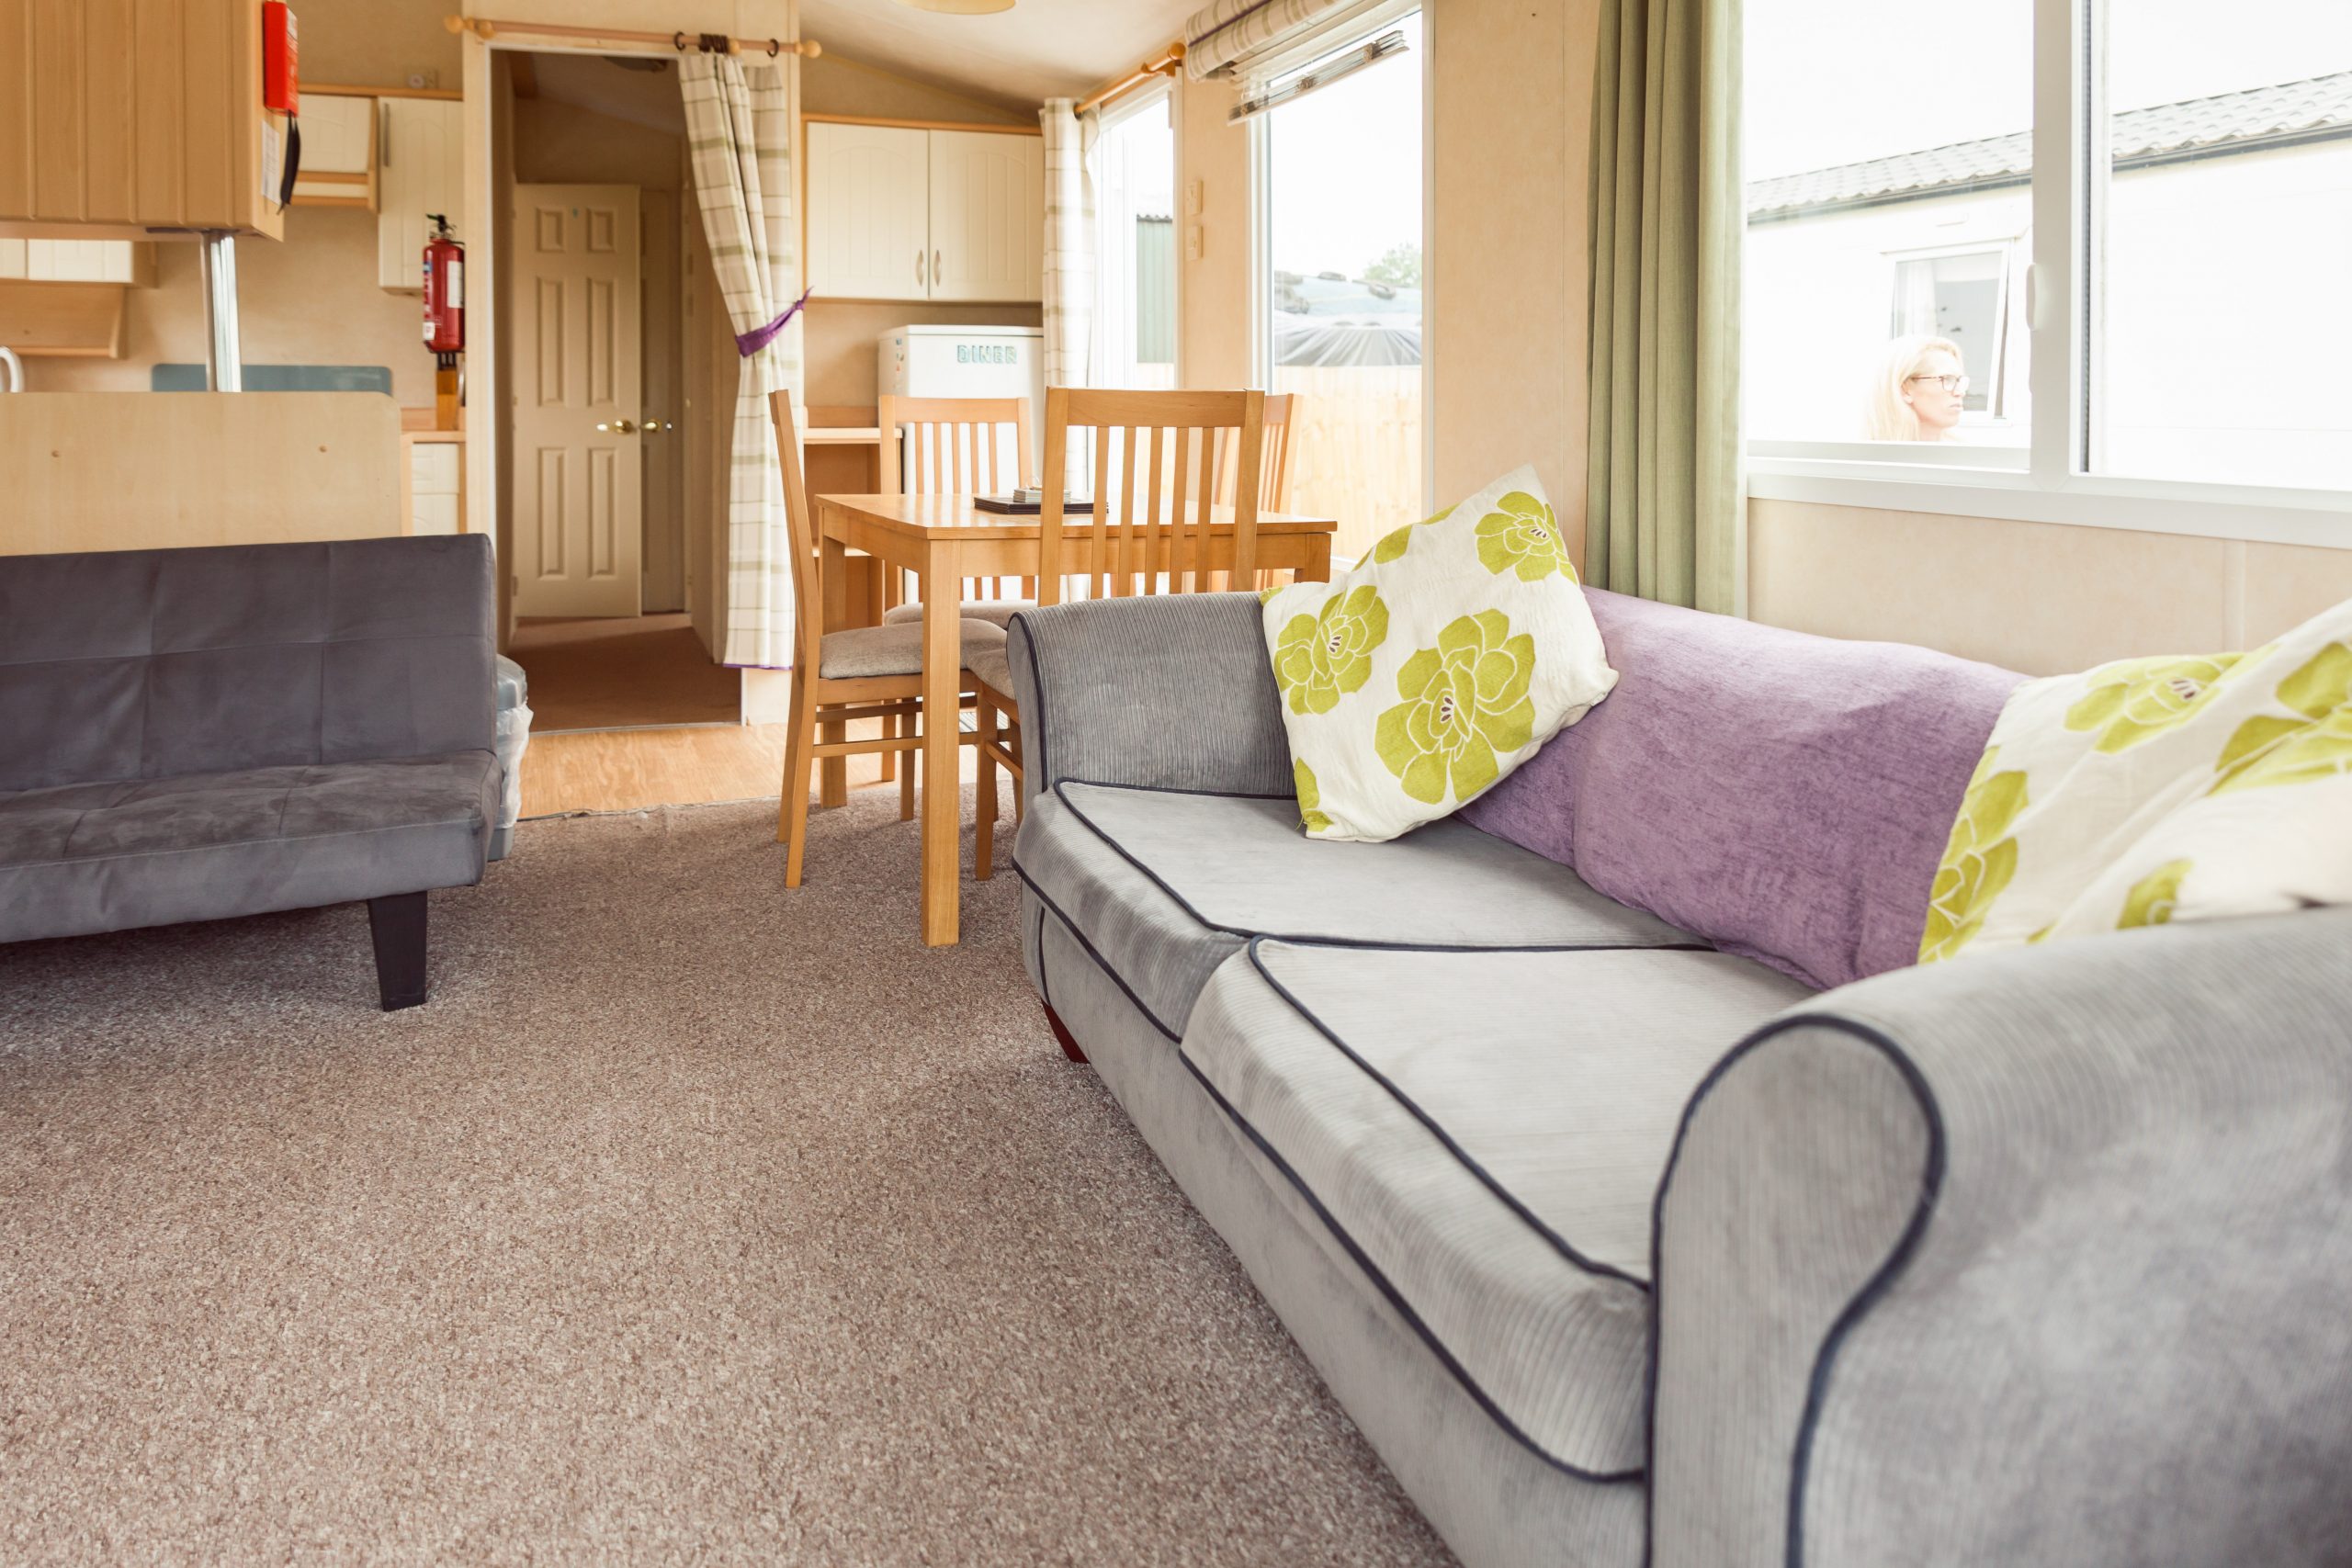 Pitch and Canvas | Glamping and Camping in Cheshire | Caravan sofas